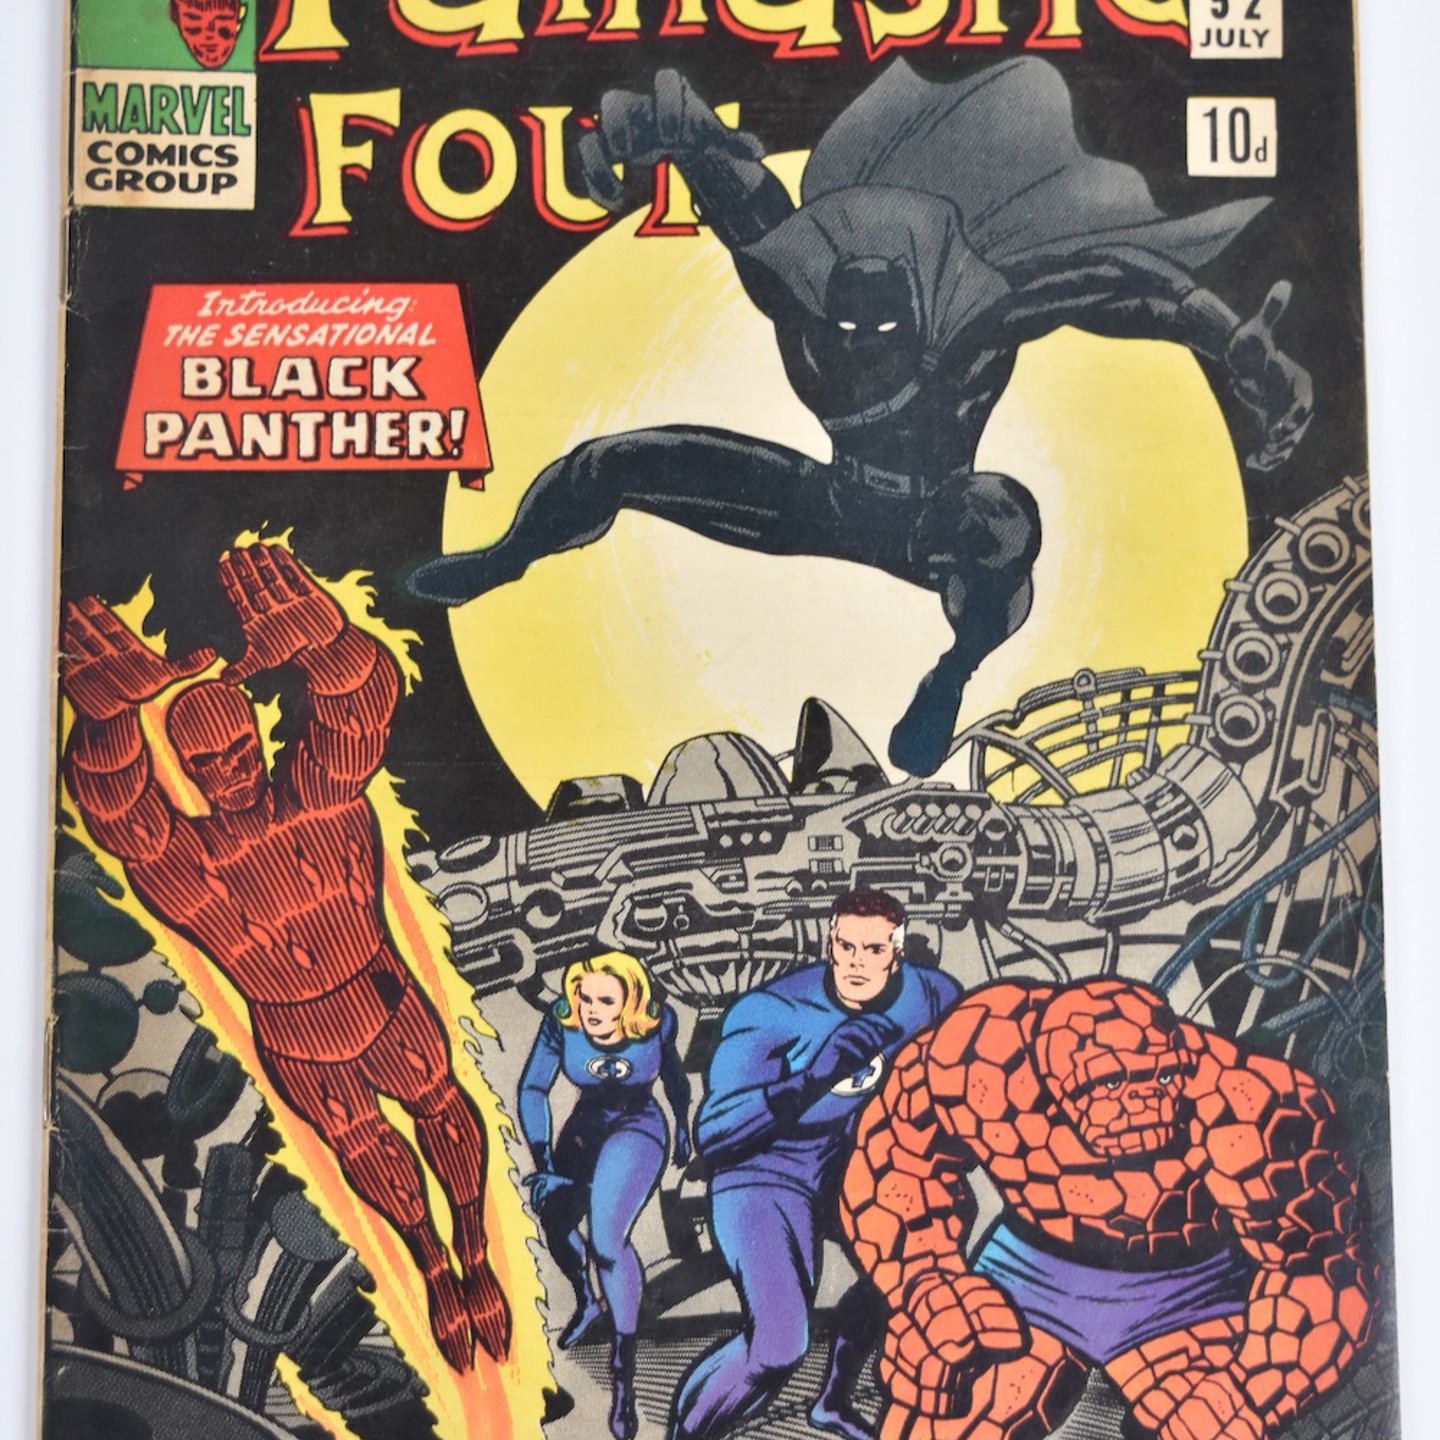 Fantastic Four Issue #52 By Marvel Comics, First Appearance Of Black Panther. HAMMER Ś360